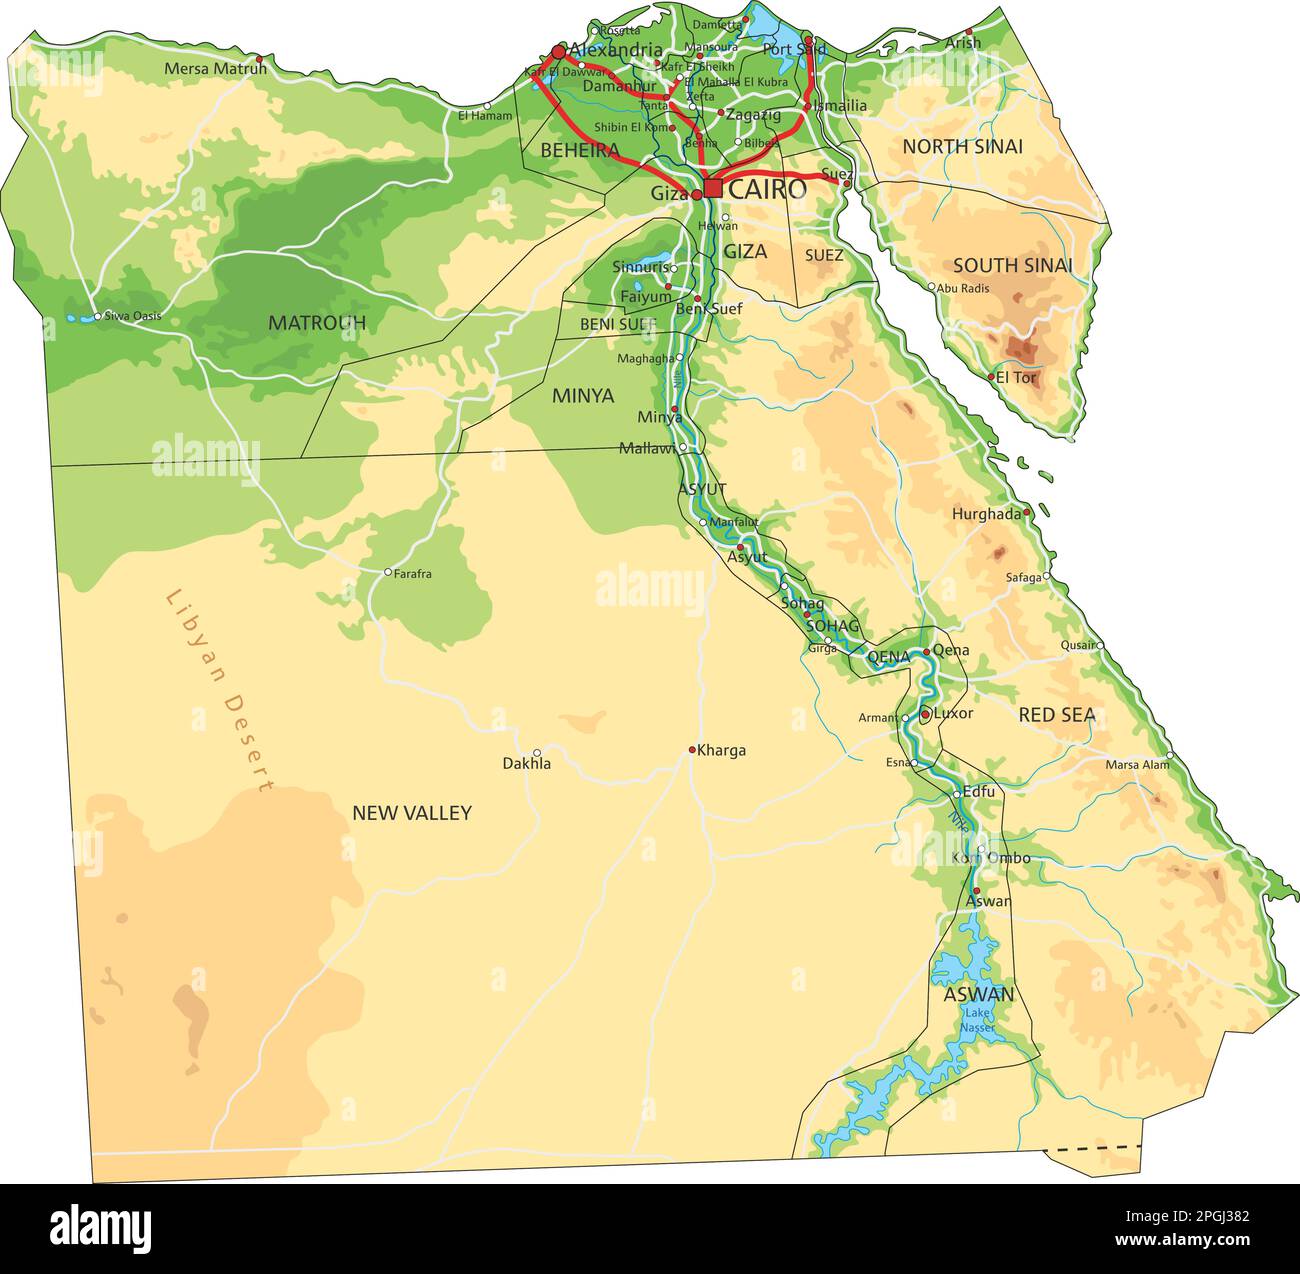 Egypt Highly Detailed Editable Political Map With Lab 0667